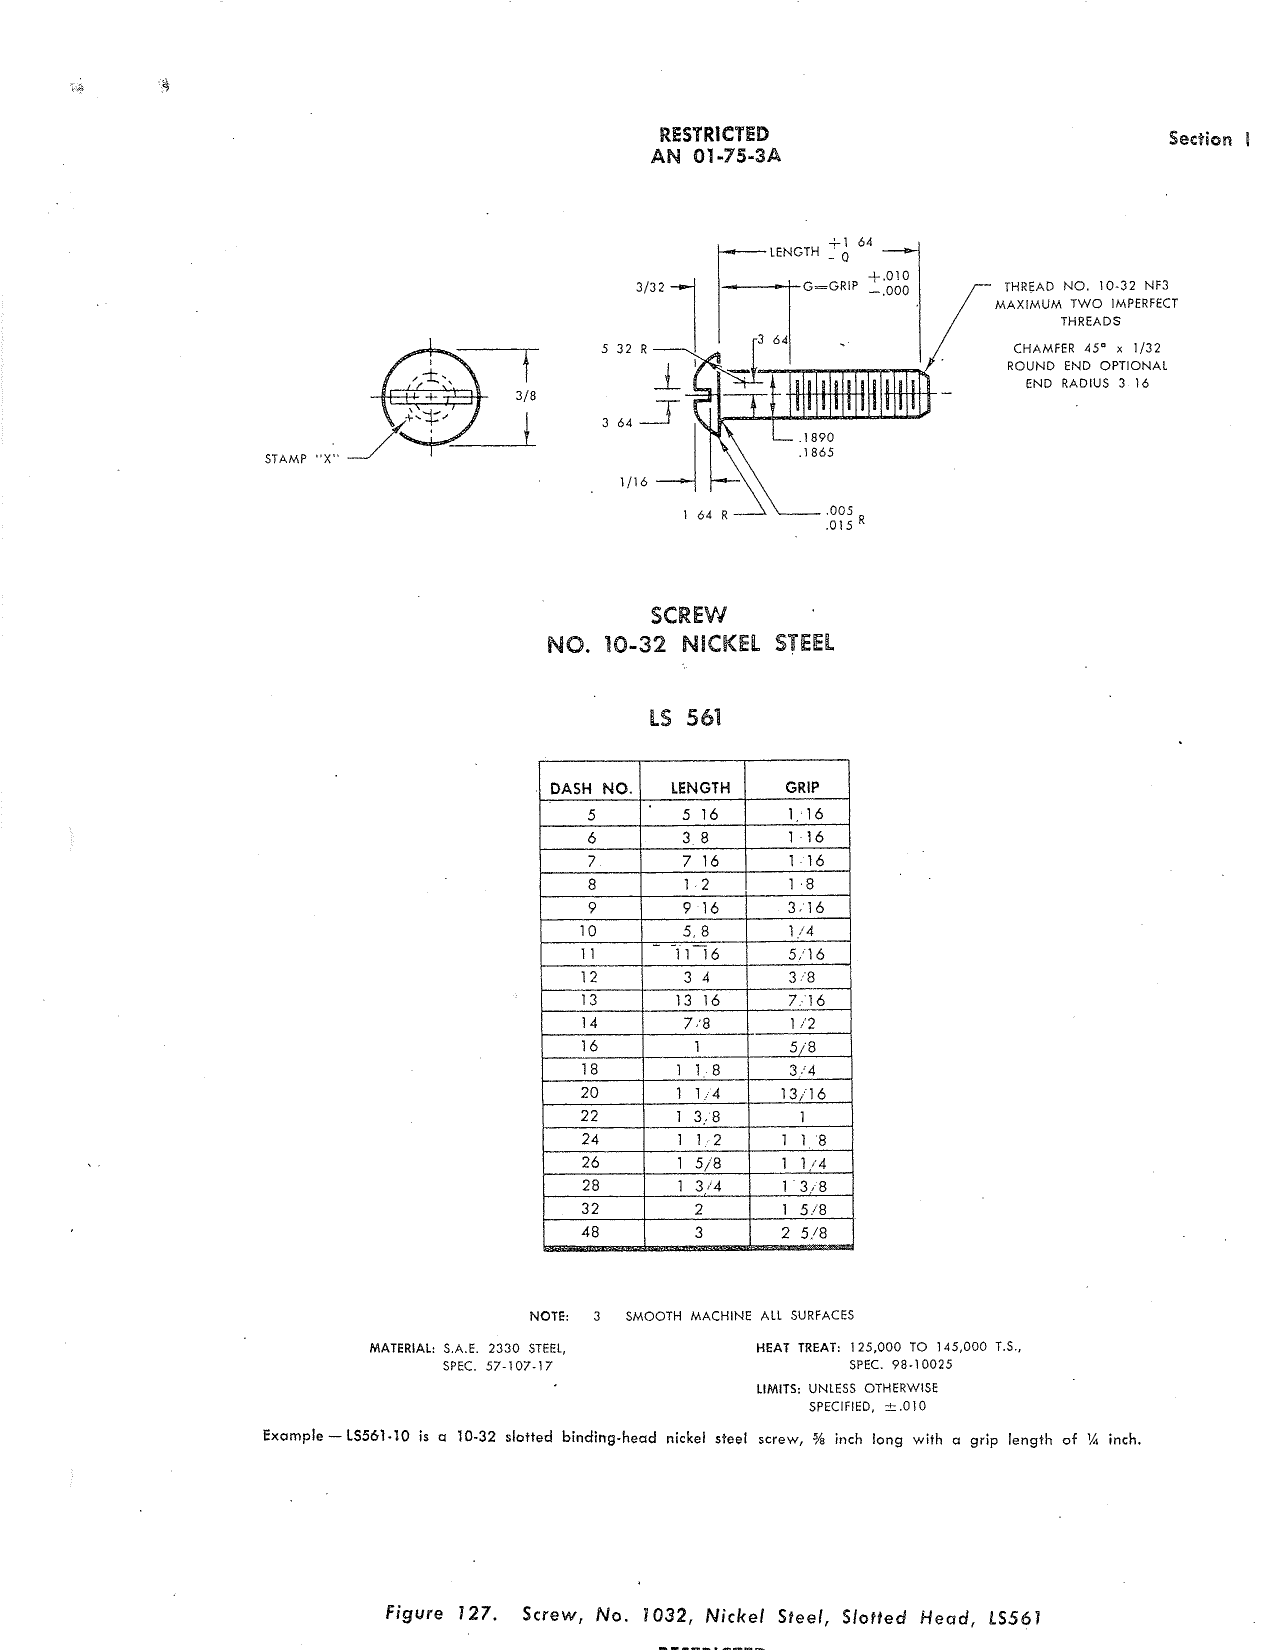 Sample page 237 from AirCorps Library document: Structural Repair Instructions - P-38